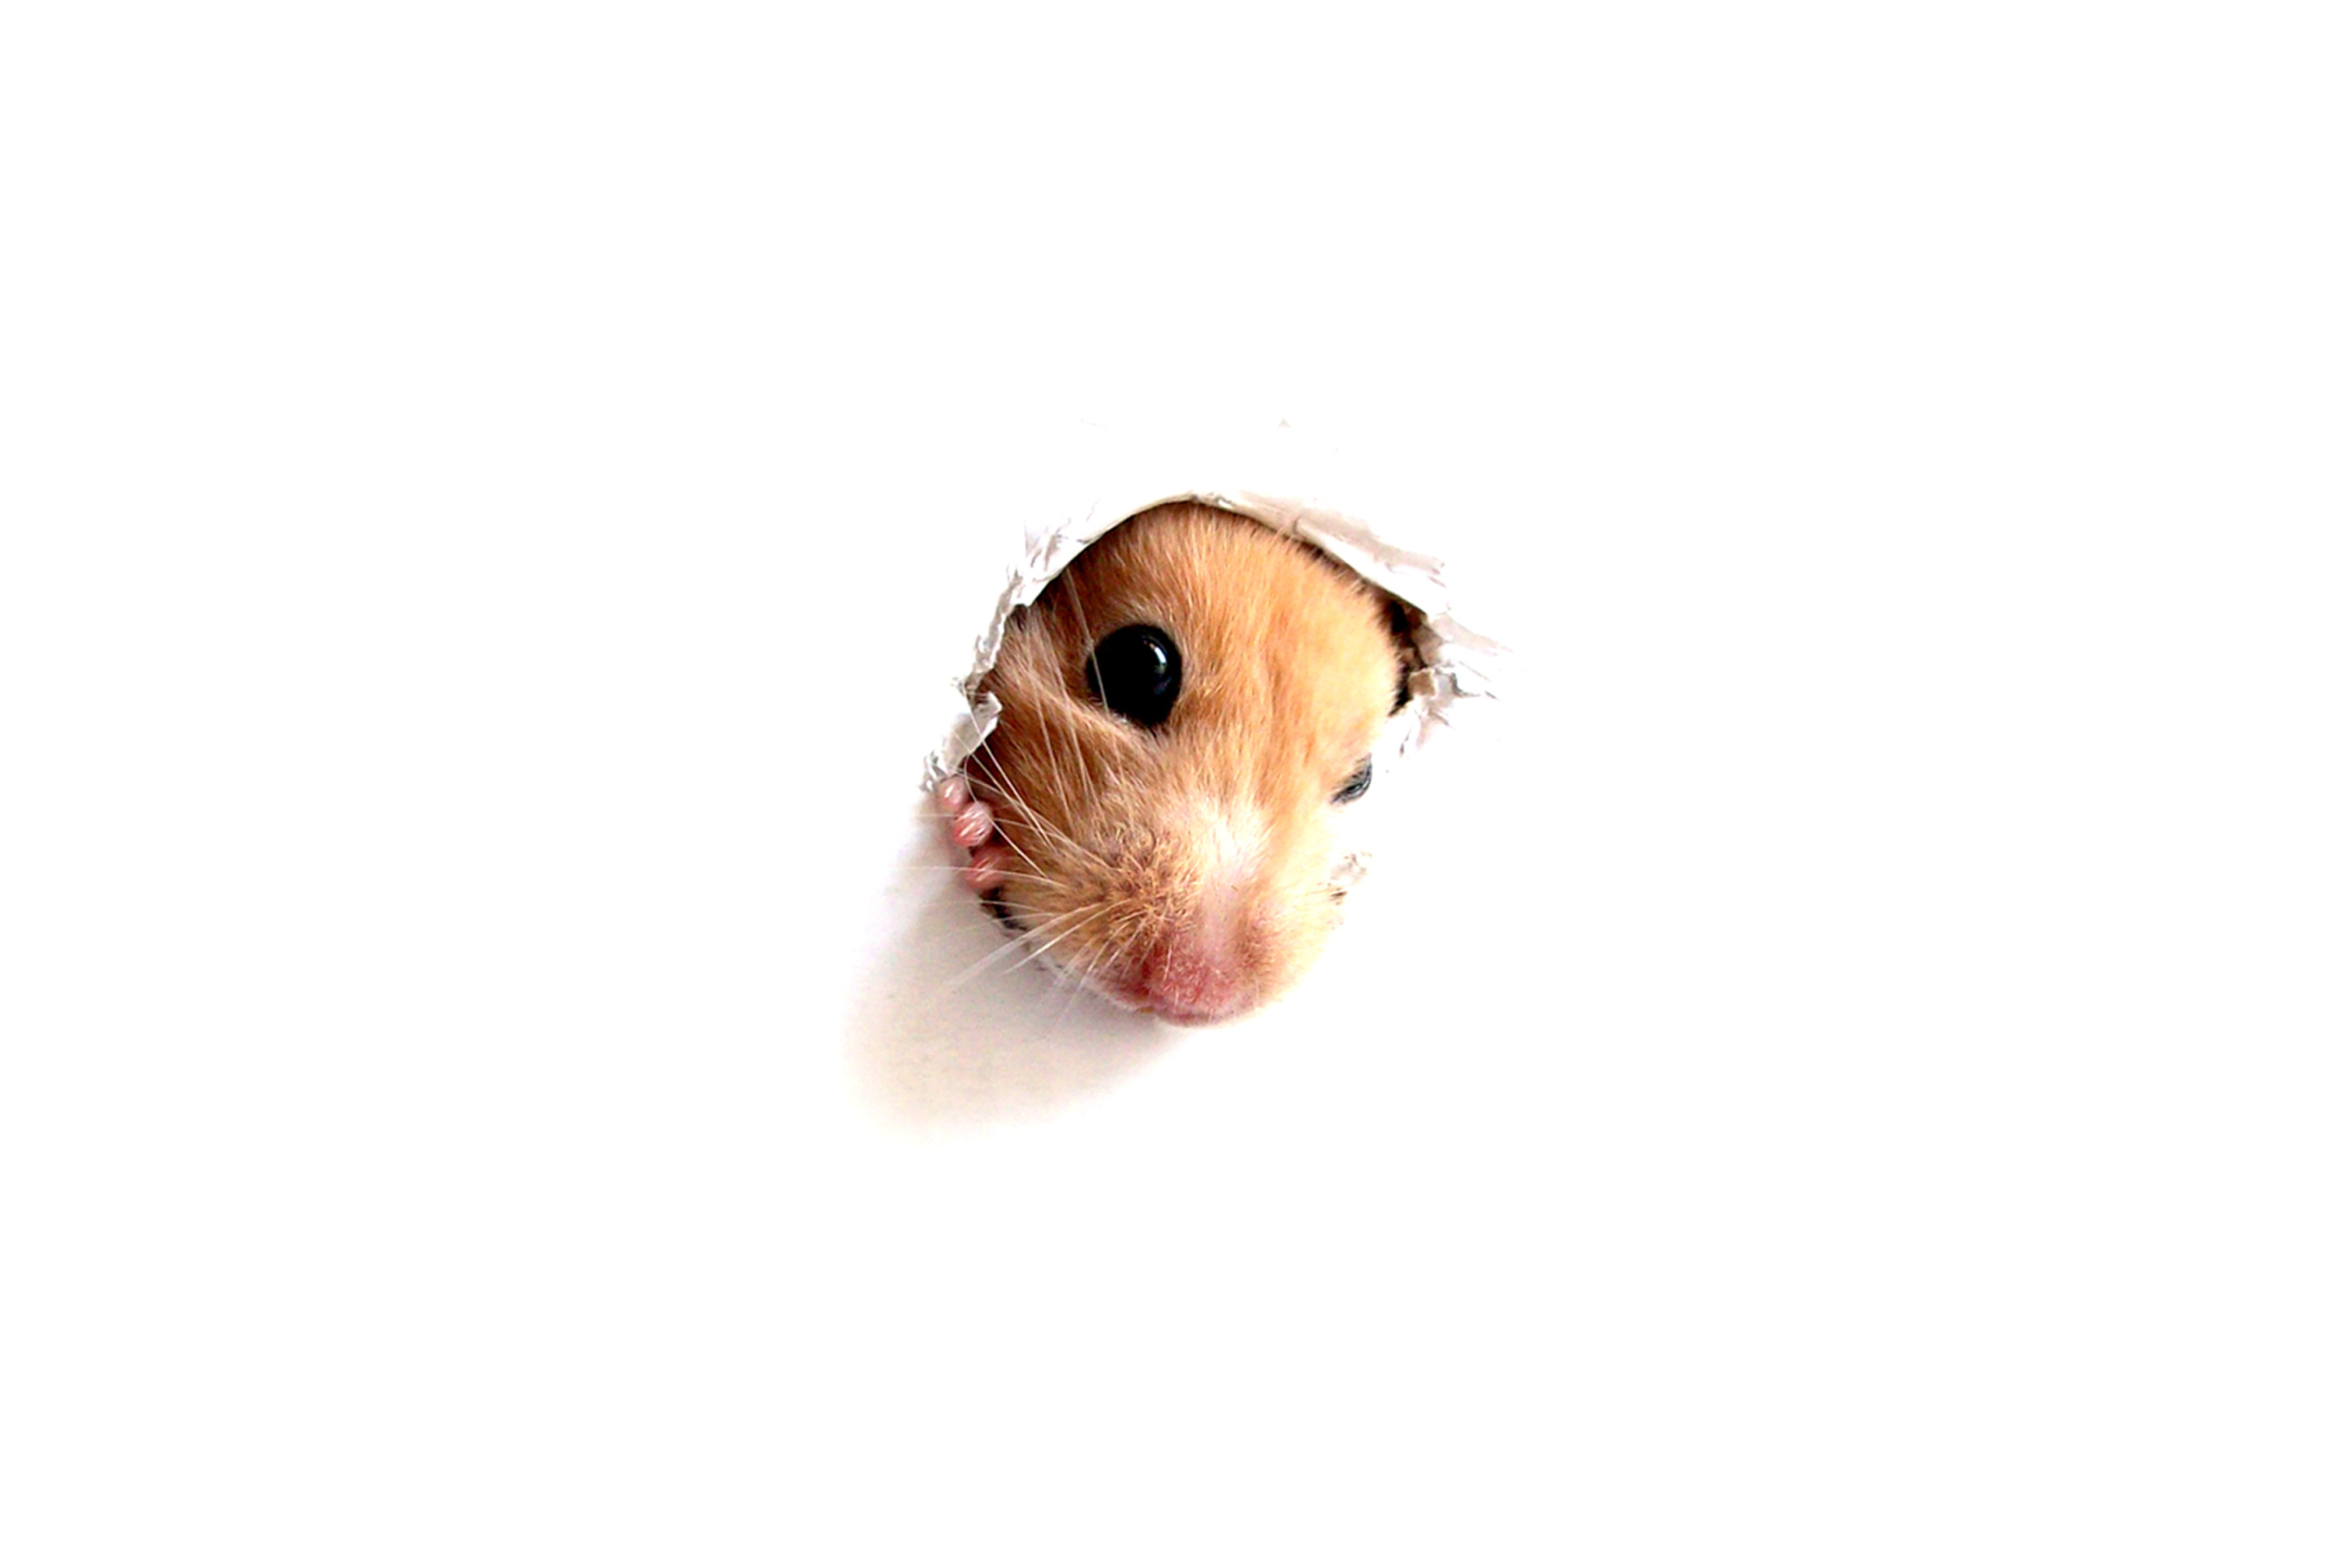 Hamster In Hole On Your Screen wallpaper 2880x1920